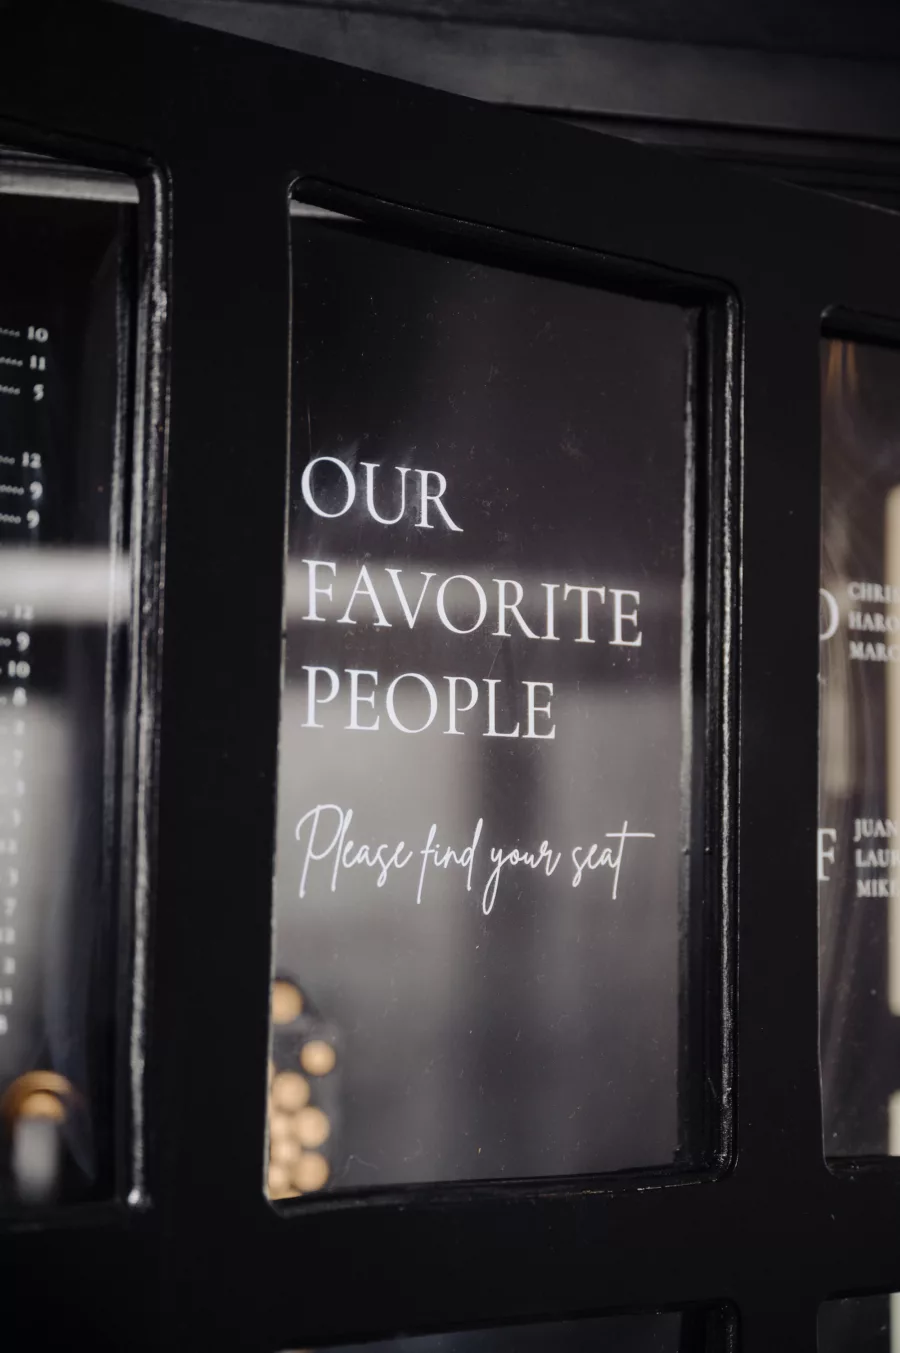 Our Favorite People Black Phone Booth Wedding Reception Seating Chart Ideas